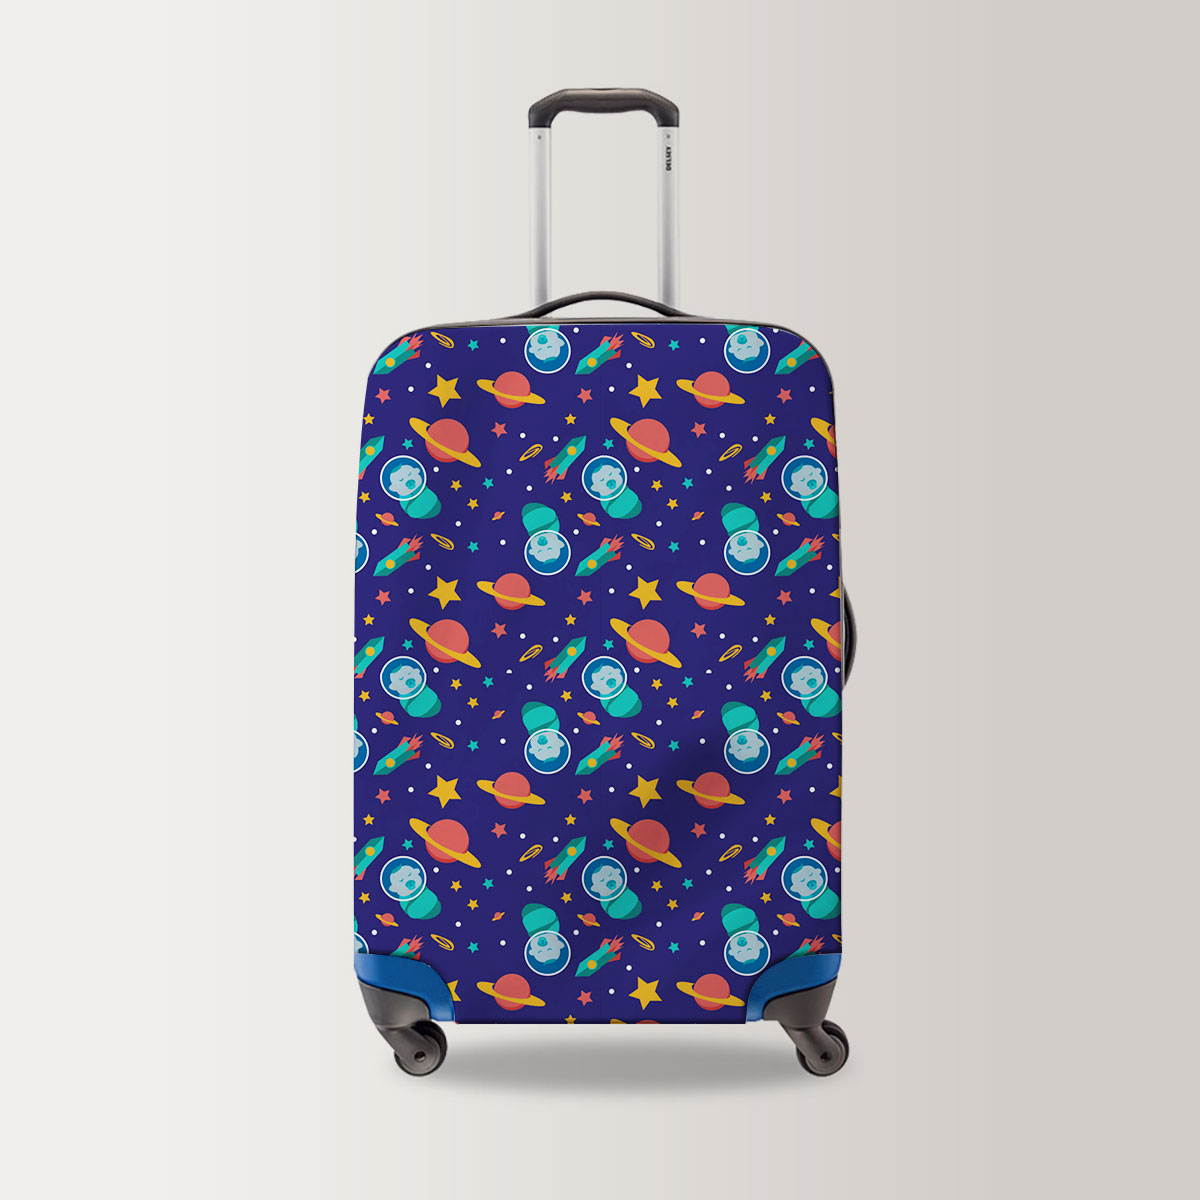 Galaxy Background With Baby Astronauts Luggage Bag